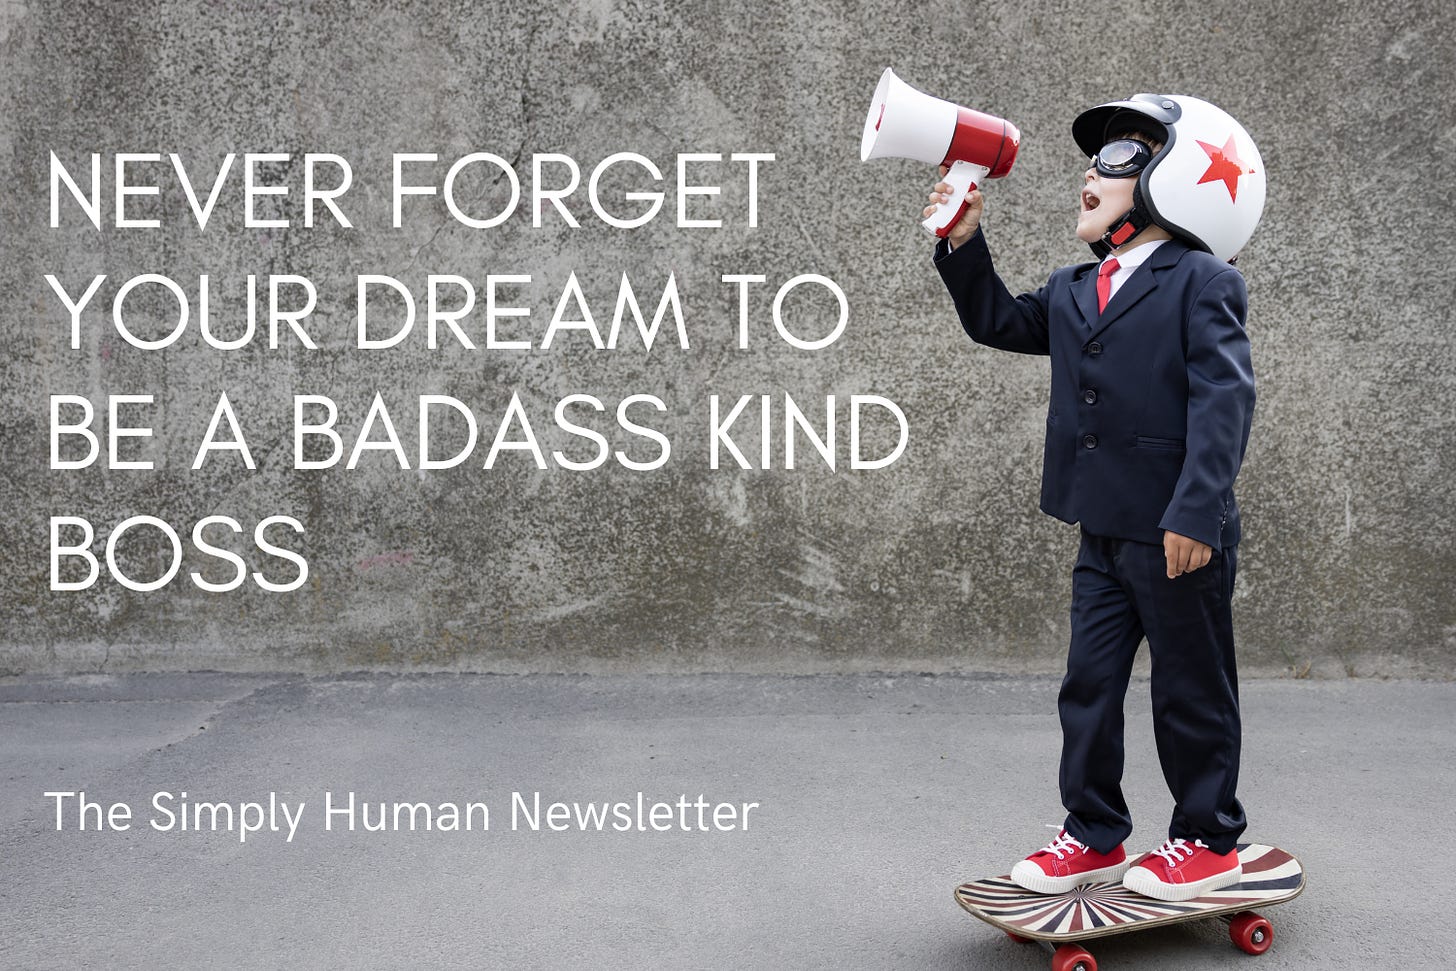 never forget your dream to be a badass kind boss - Simply Human Newsletter